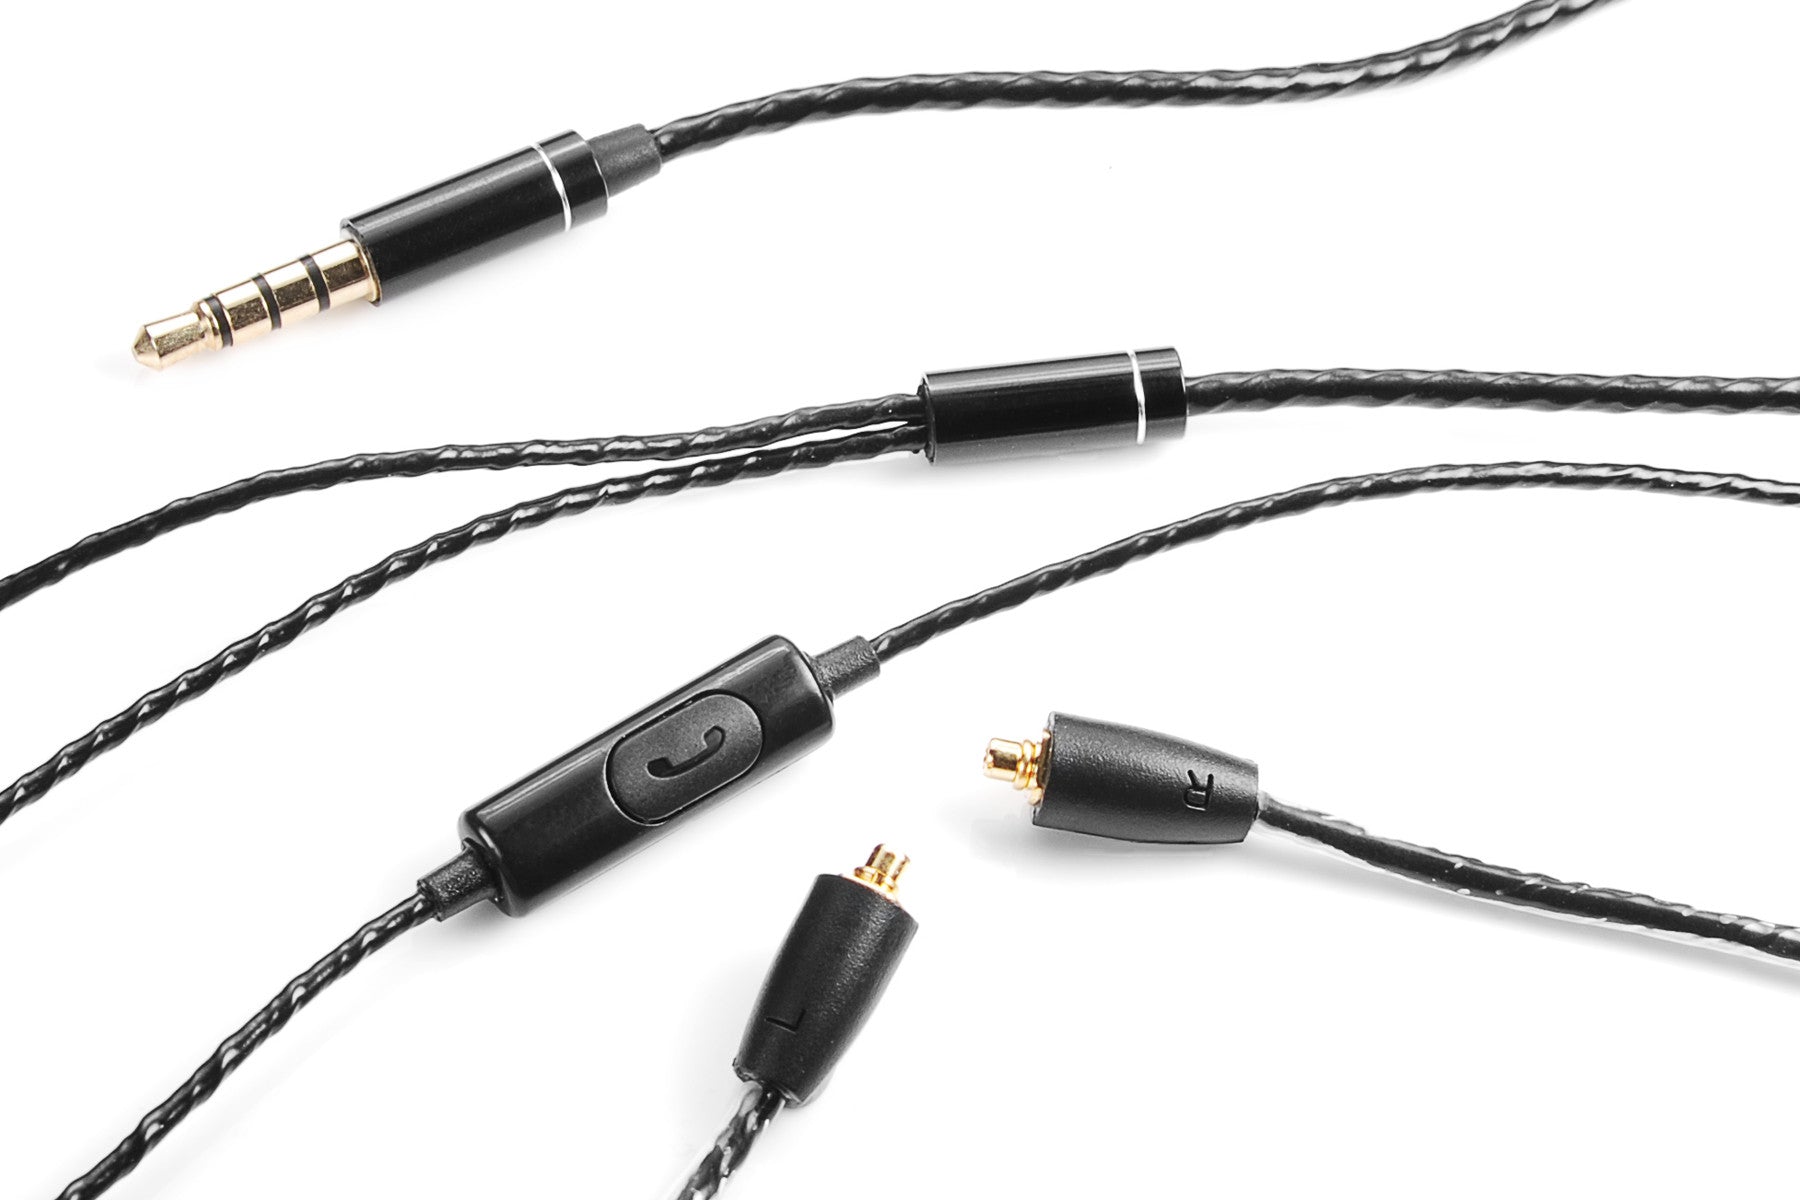 [Lear] Cable and Accessories - Annual Hot Pick!